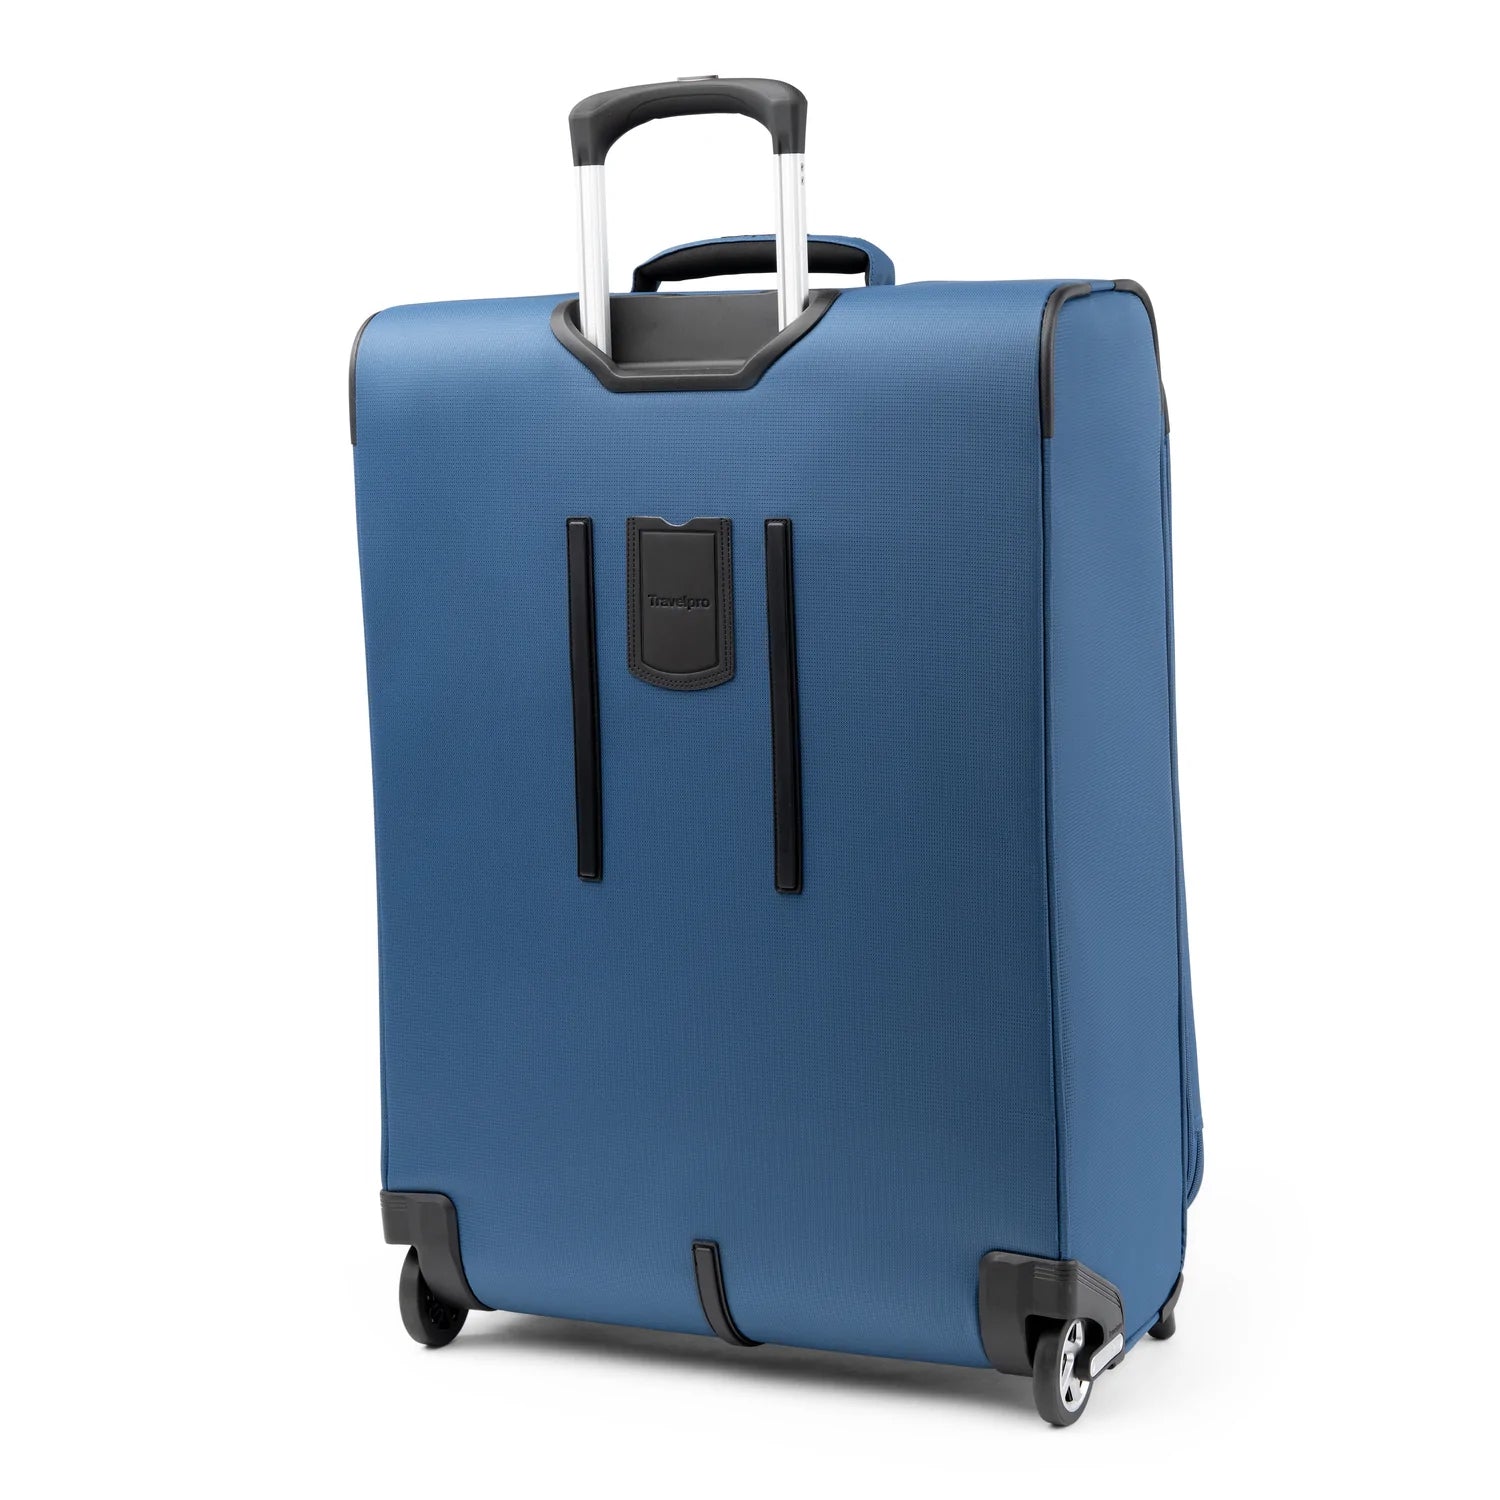 Travelpro Maxlite 5 26 Expandable Rollaboard Ensign Blue